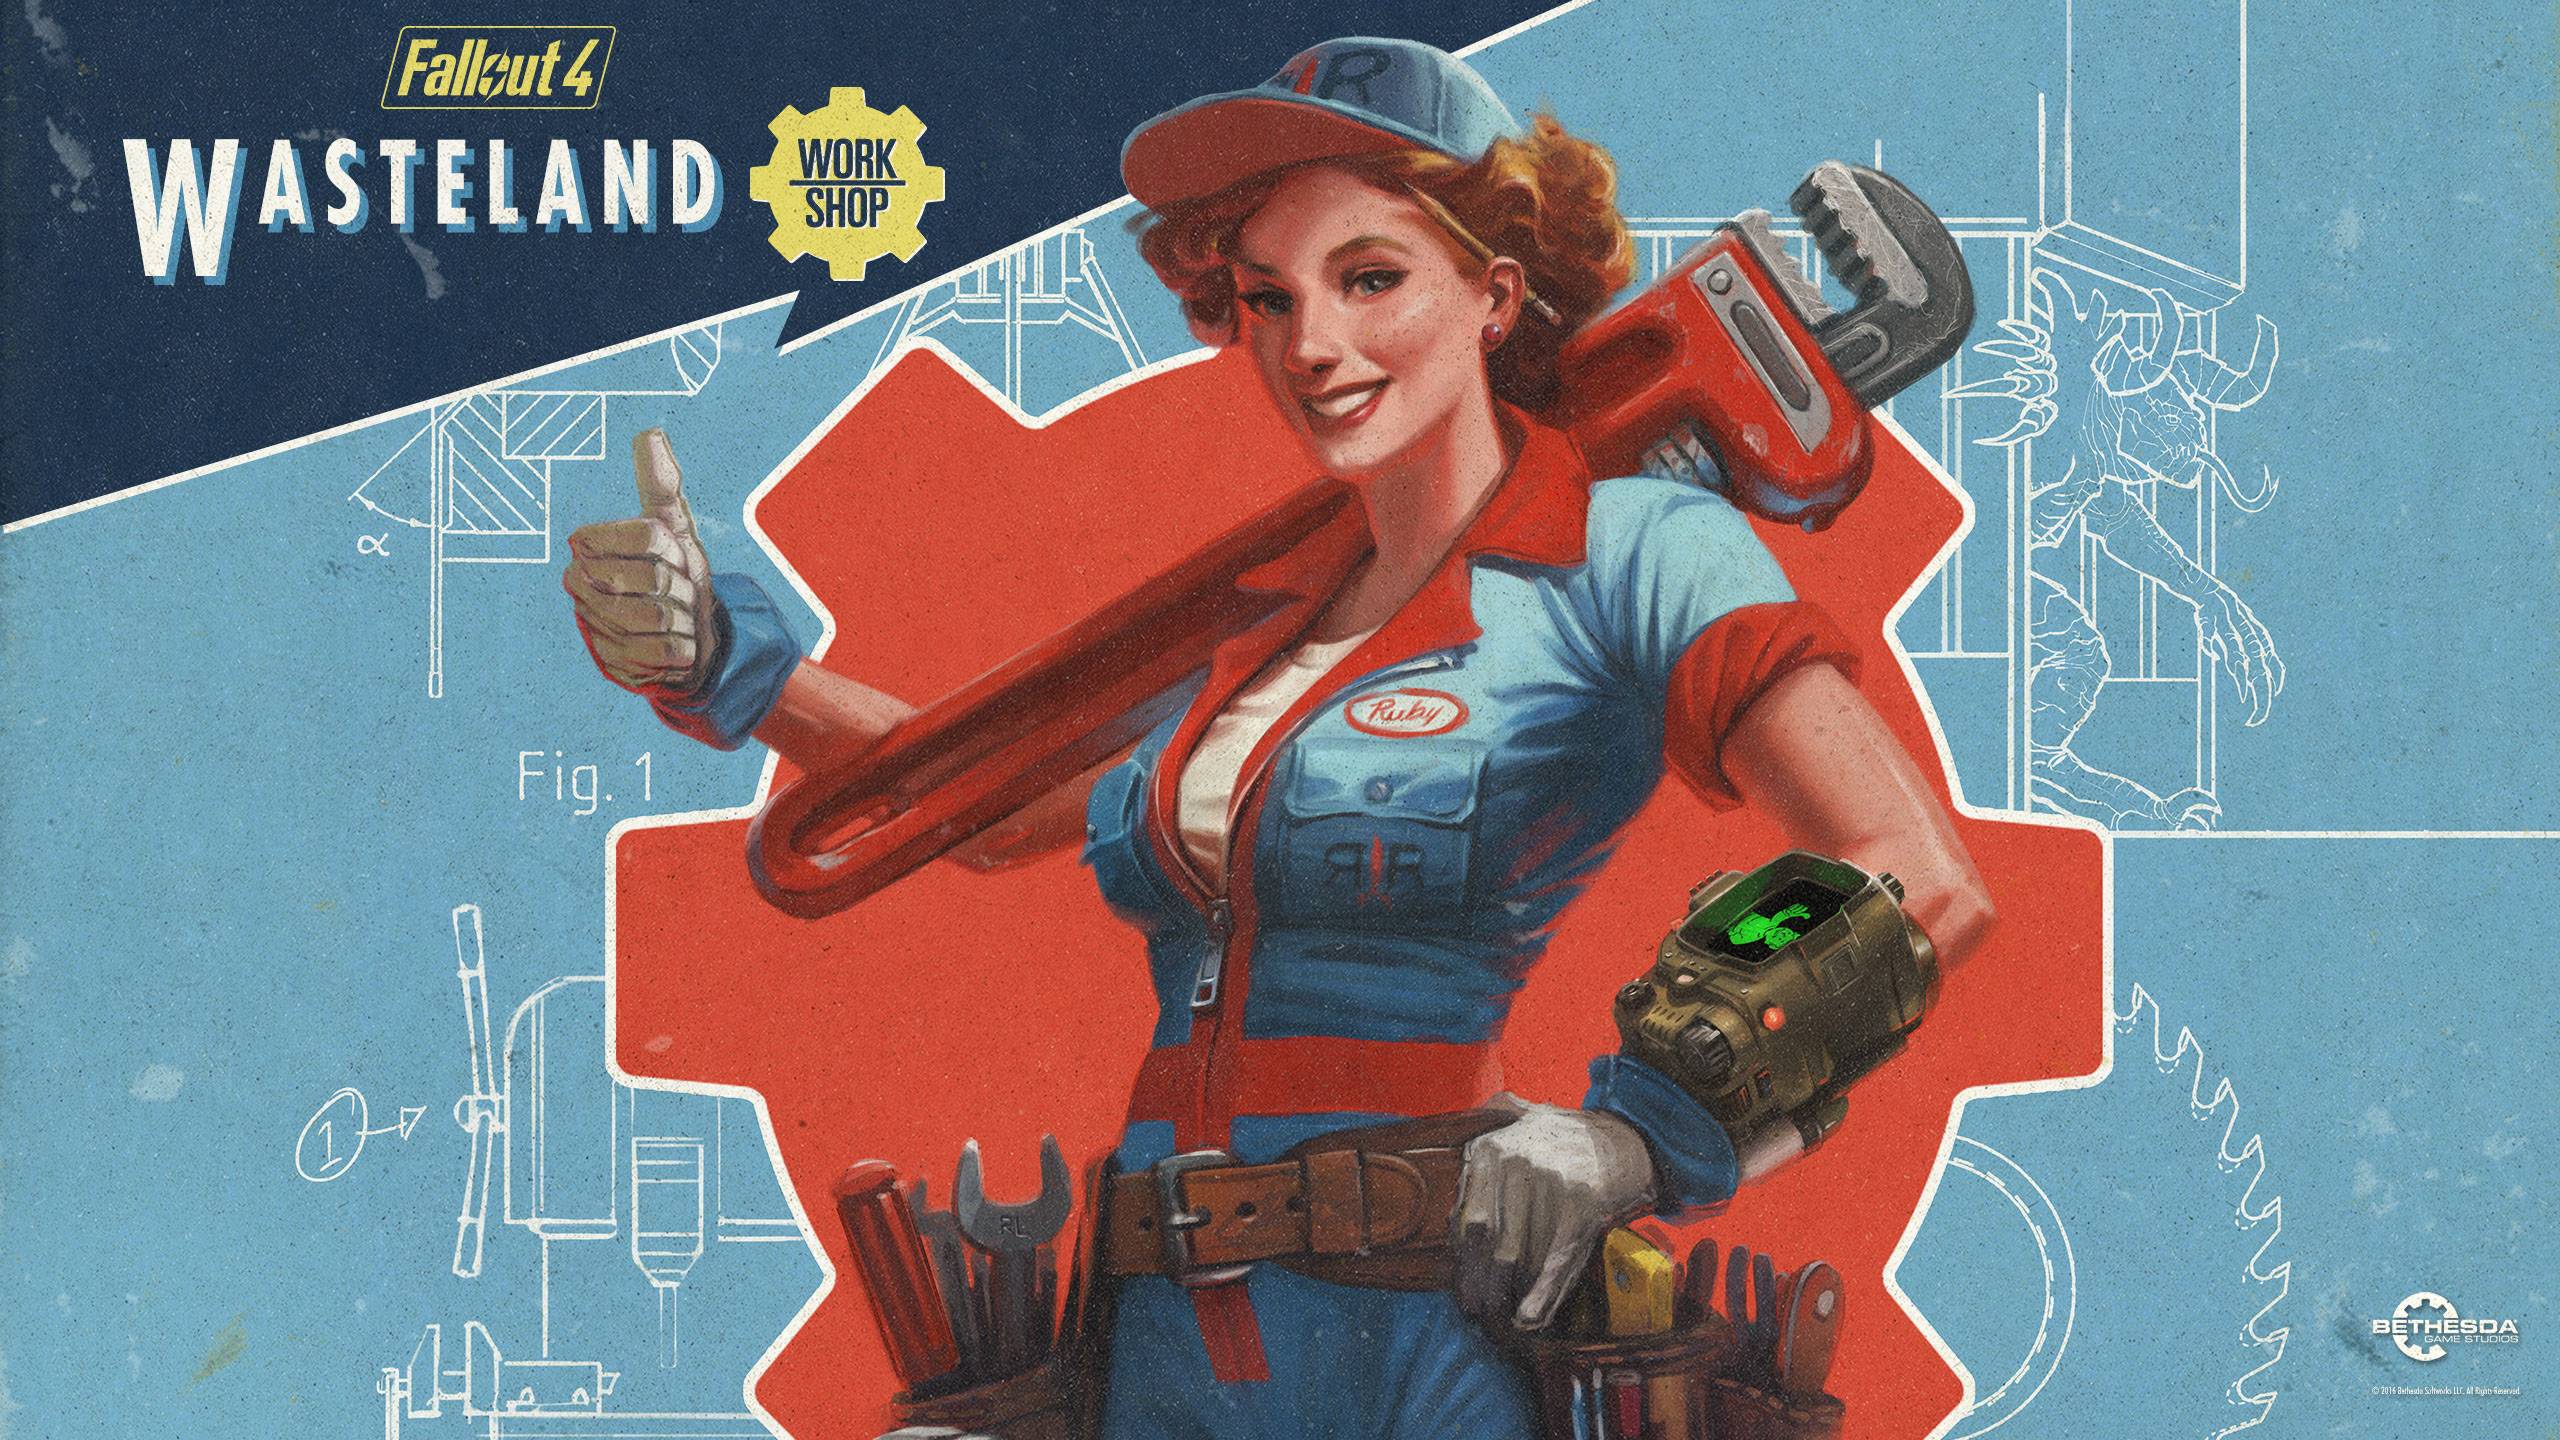 Clean wasteland workshop fallout 4 фото 65